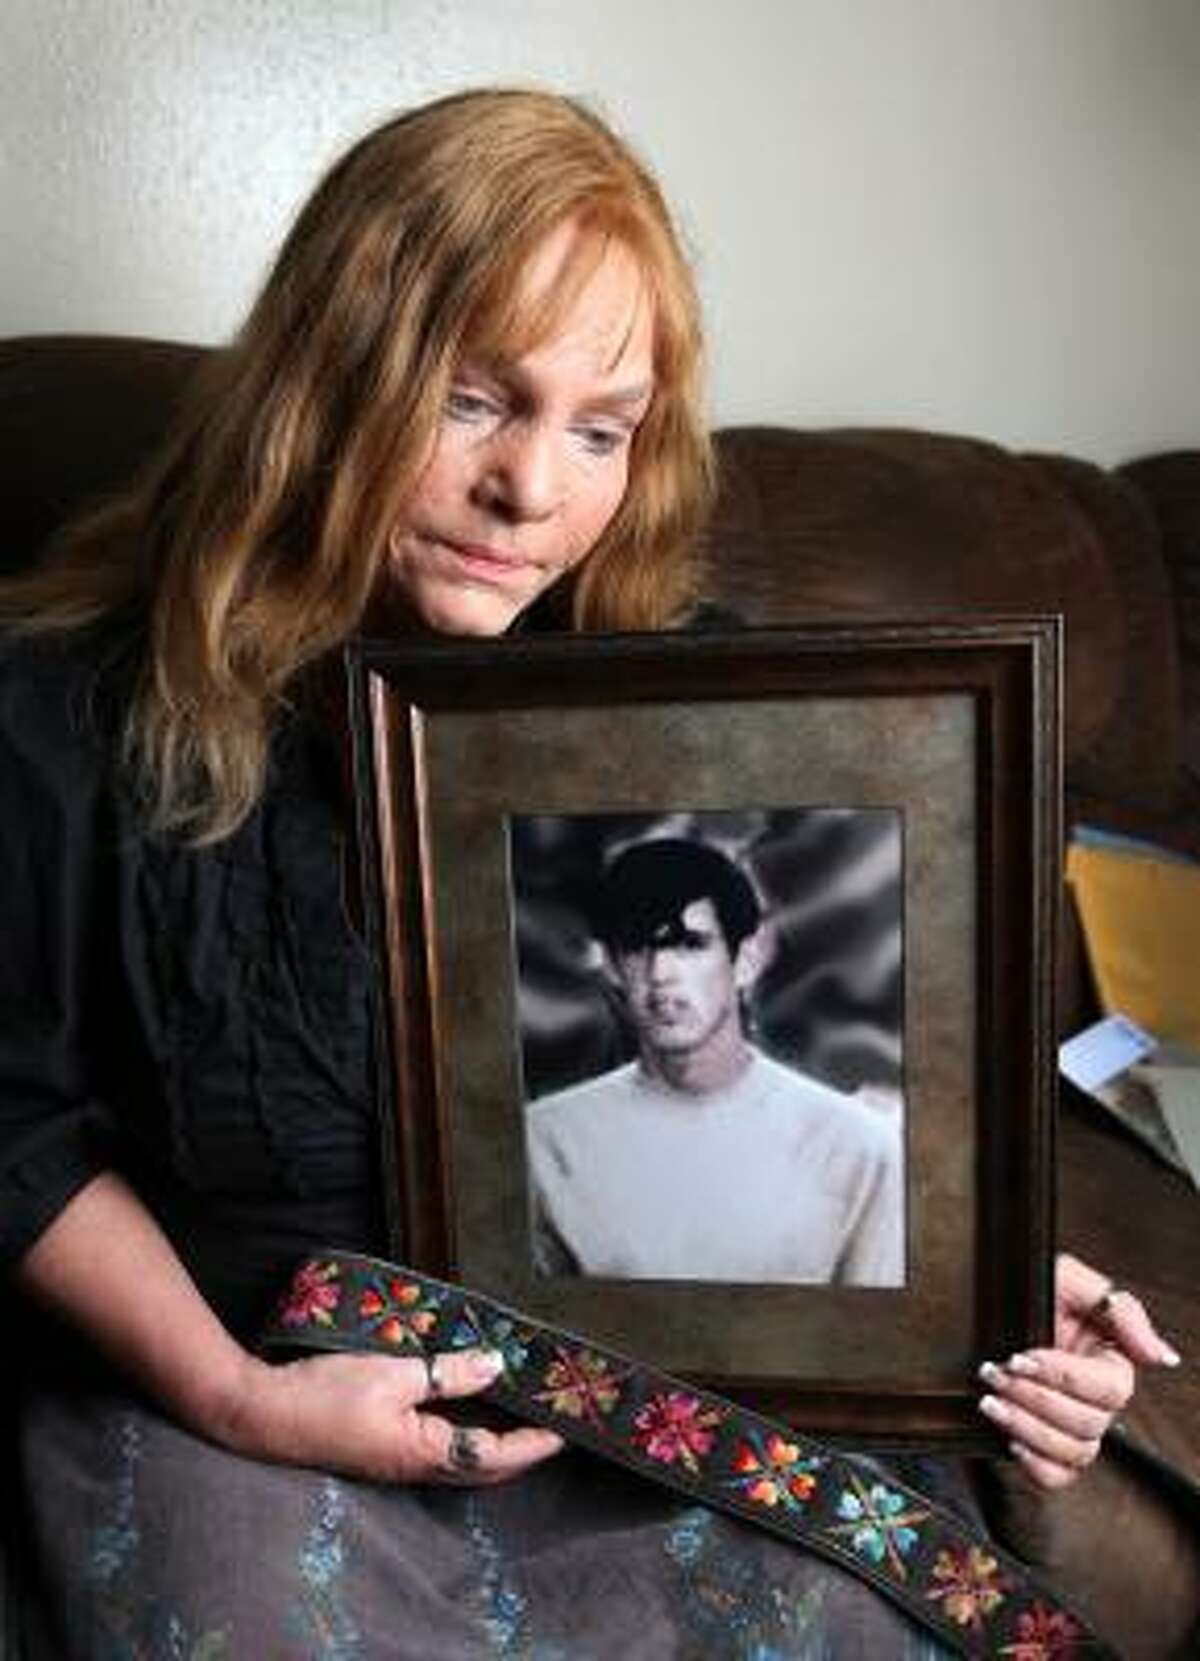 Sandy Henrichs was 14 when her brother, Steven, disappeared. Now 53, she regrets squabbling with him earlier that day, but also strong is her anger at the Houston police: "They didn't do anything."